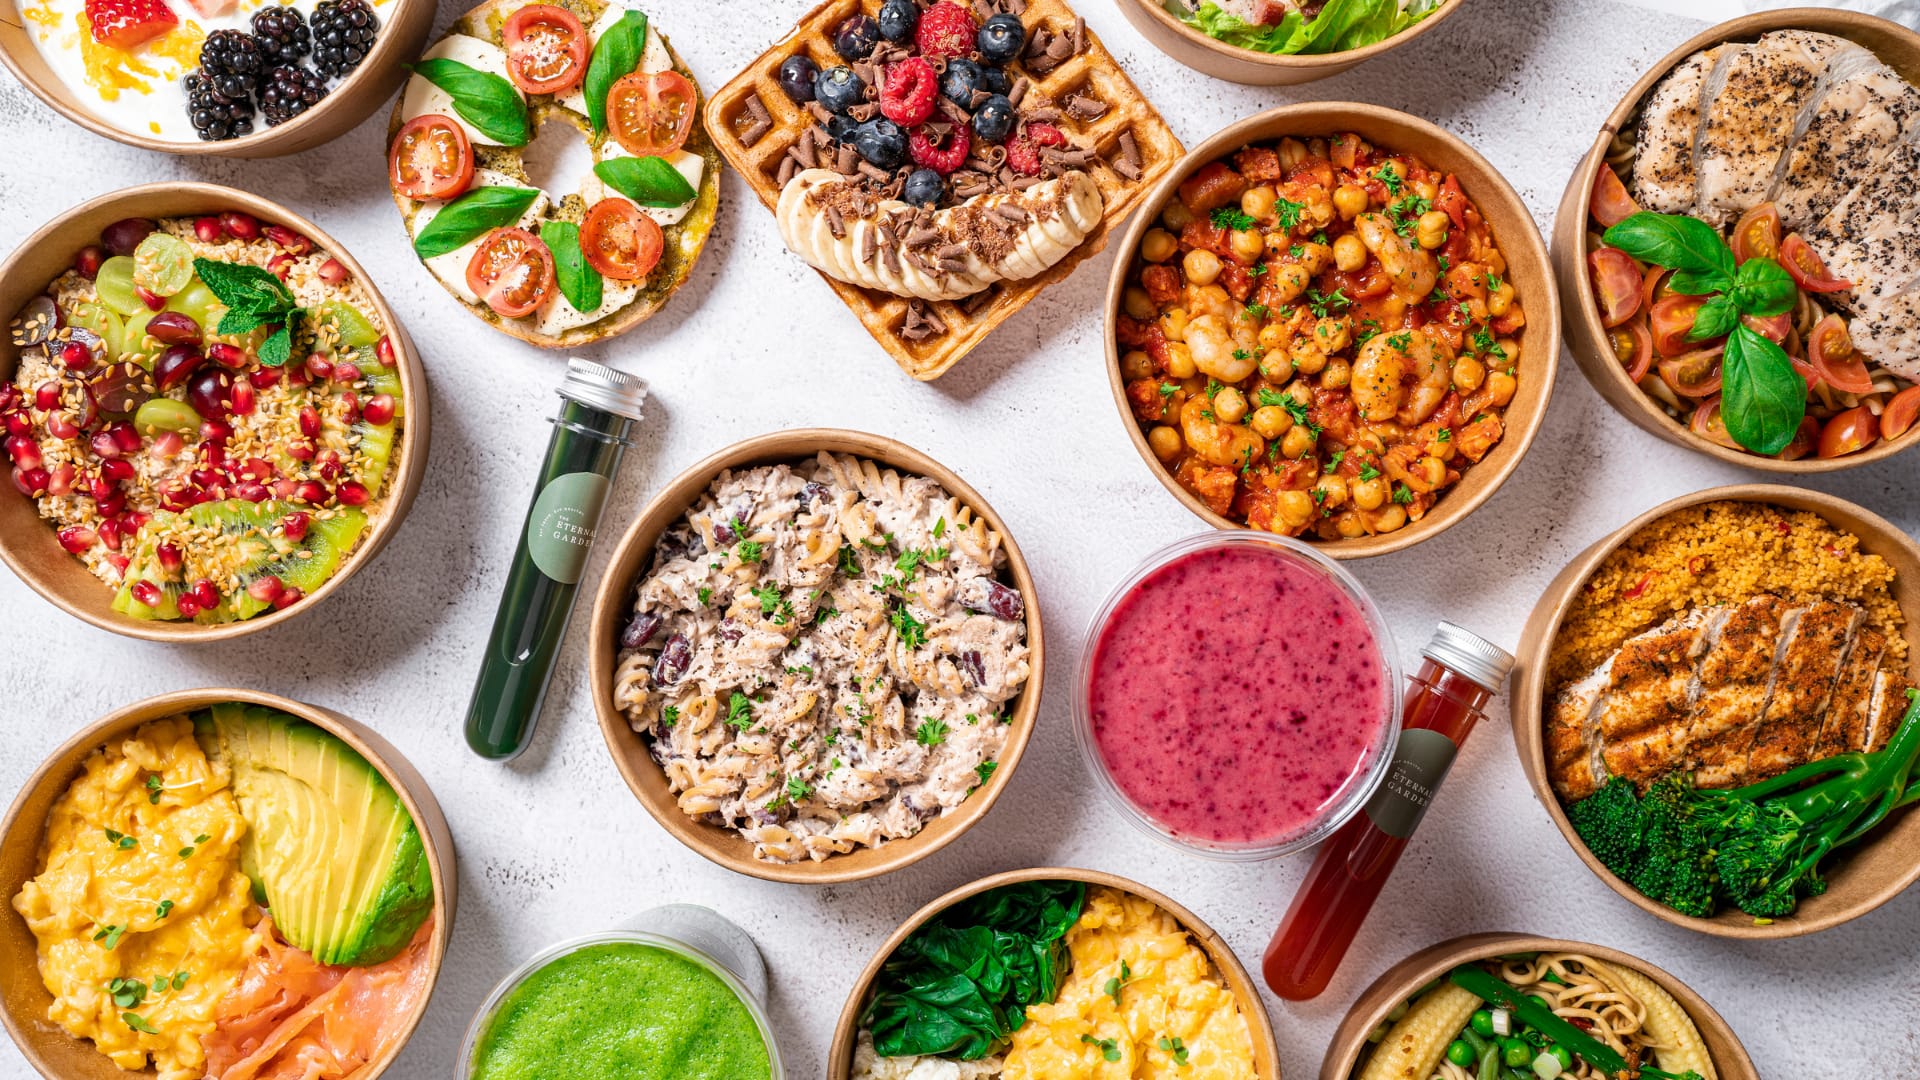 The Eternal Garden delivery from Canary Wharf - Order with Deliveroo